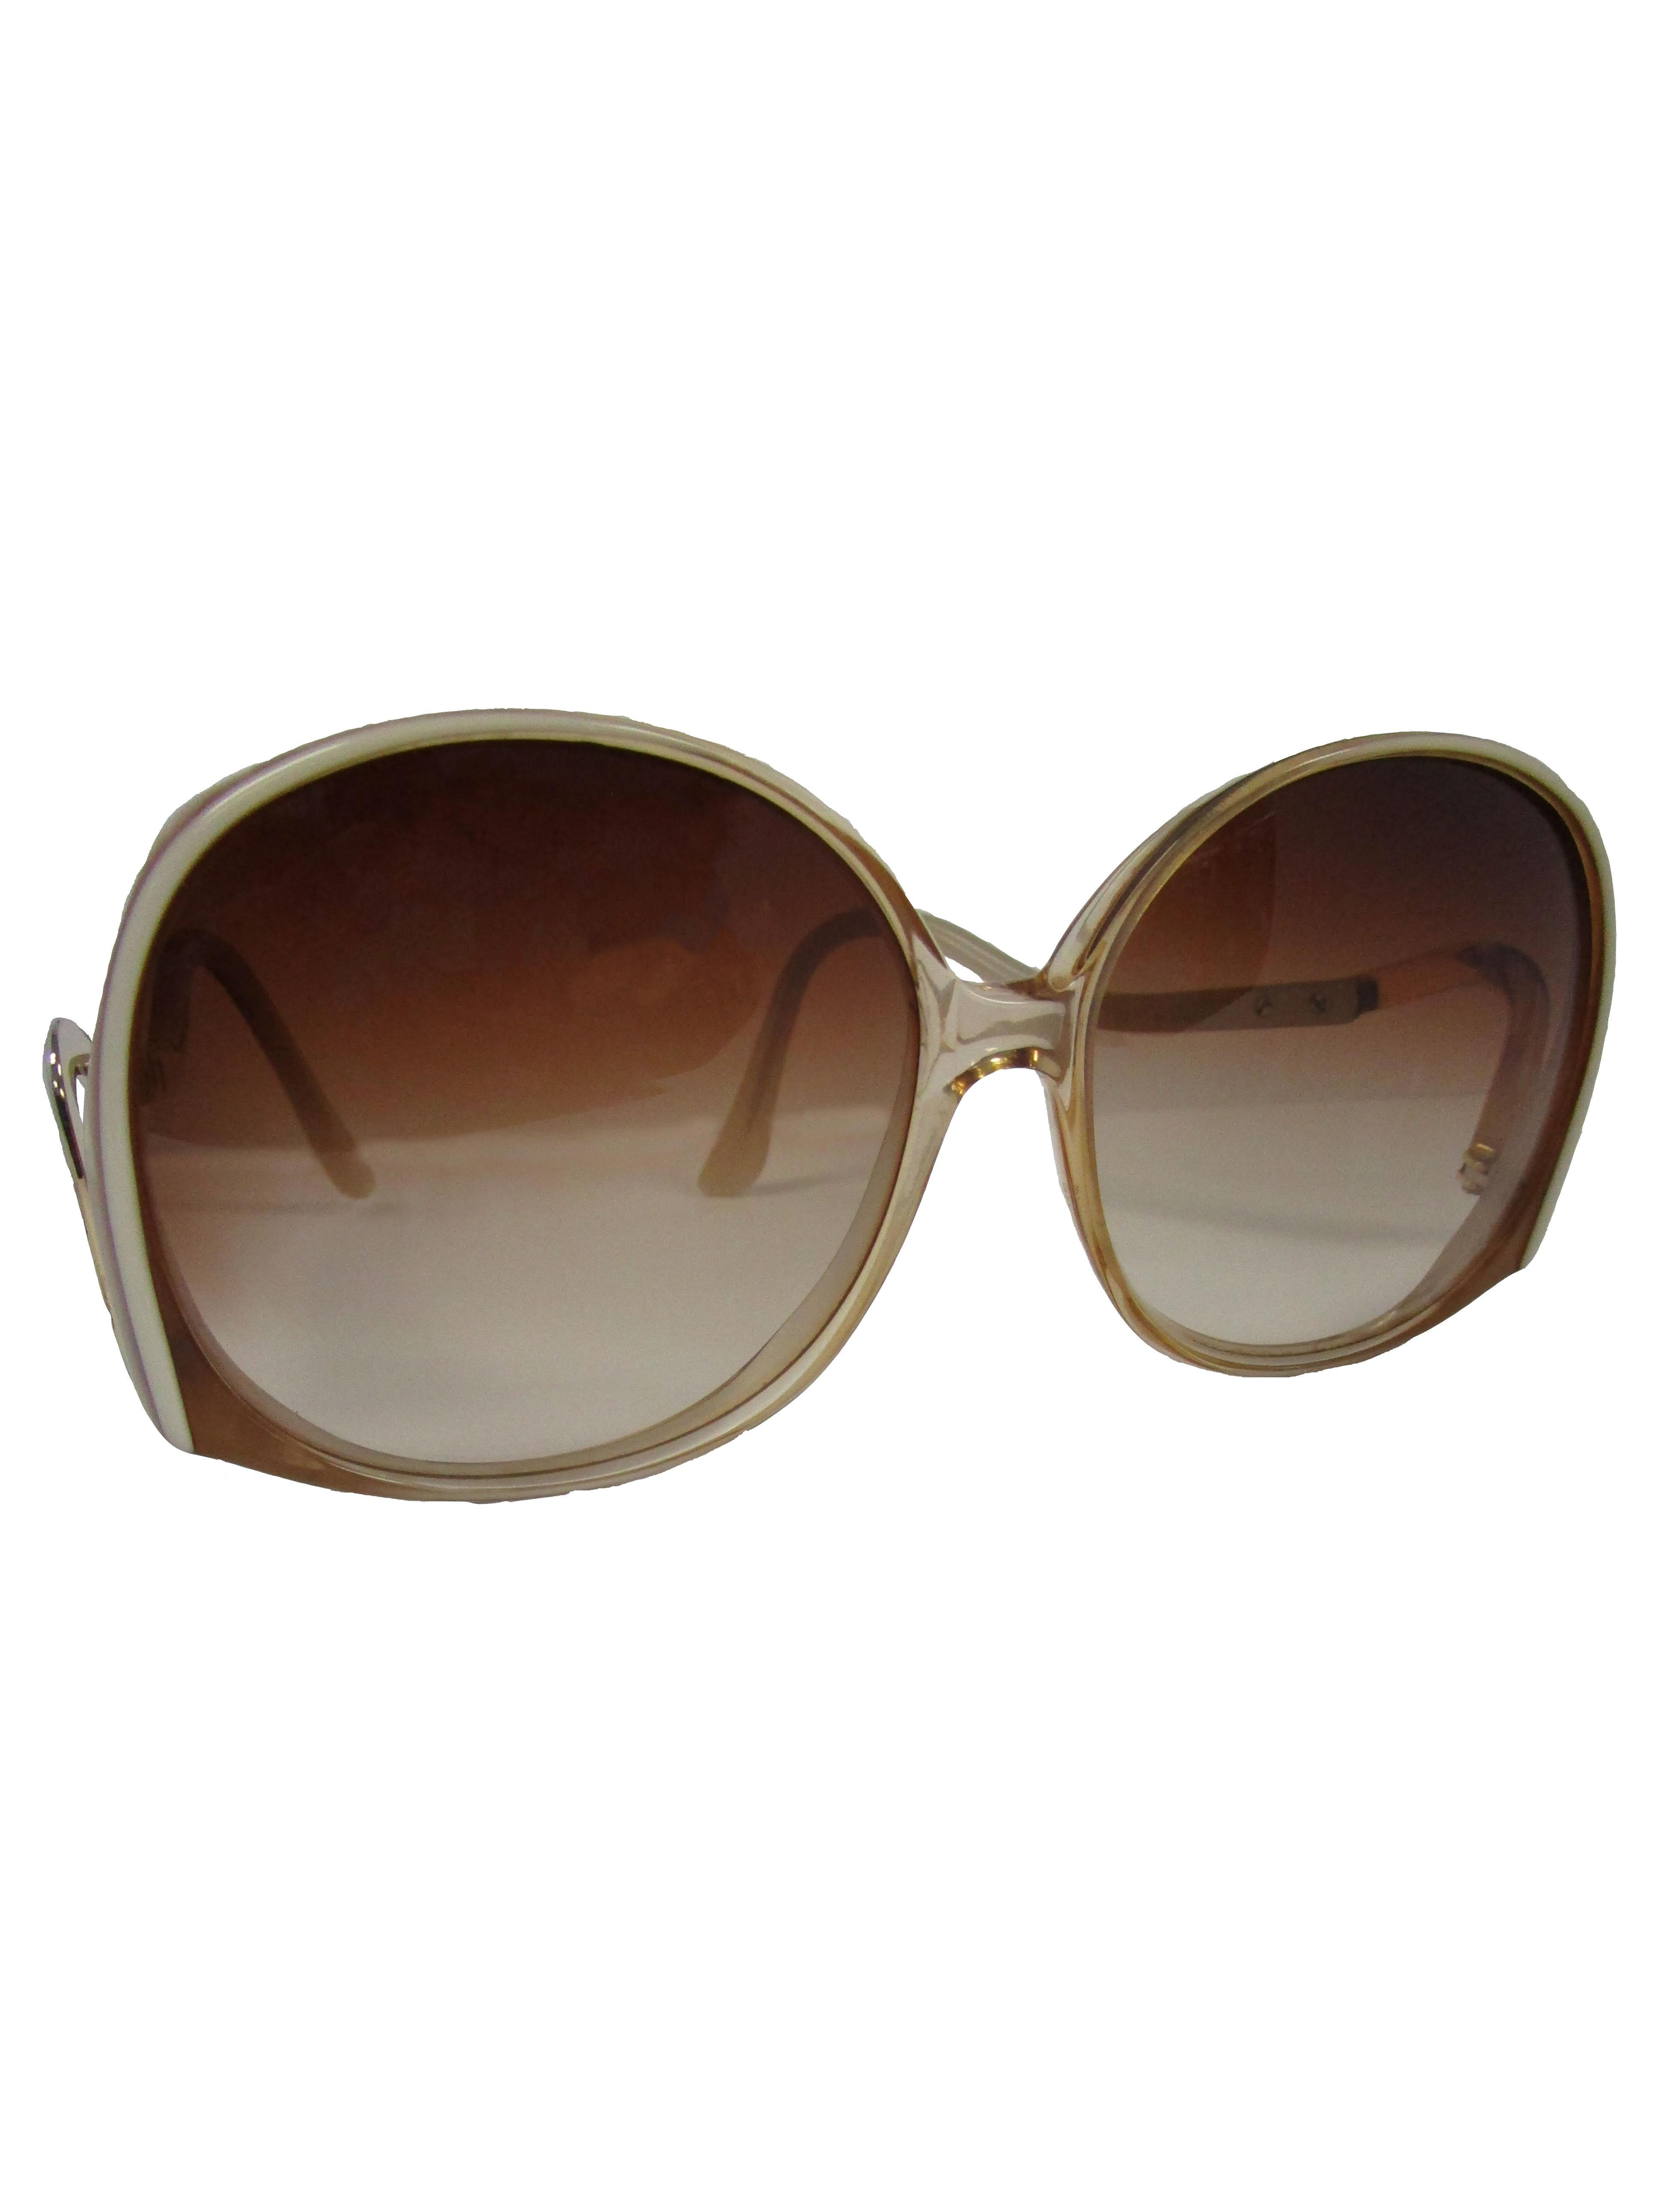 
Beautiful sunglasses from Pierre Cardin. They feature an ombre tint and an amber resin inlay on the arms that brandish the Cardin logo. The color palette on these sunglasses make it easier to wear all year round, in style!

Width: 5.5 inches
Arm